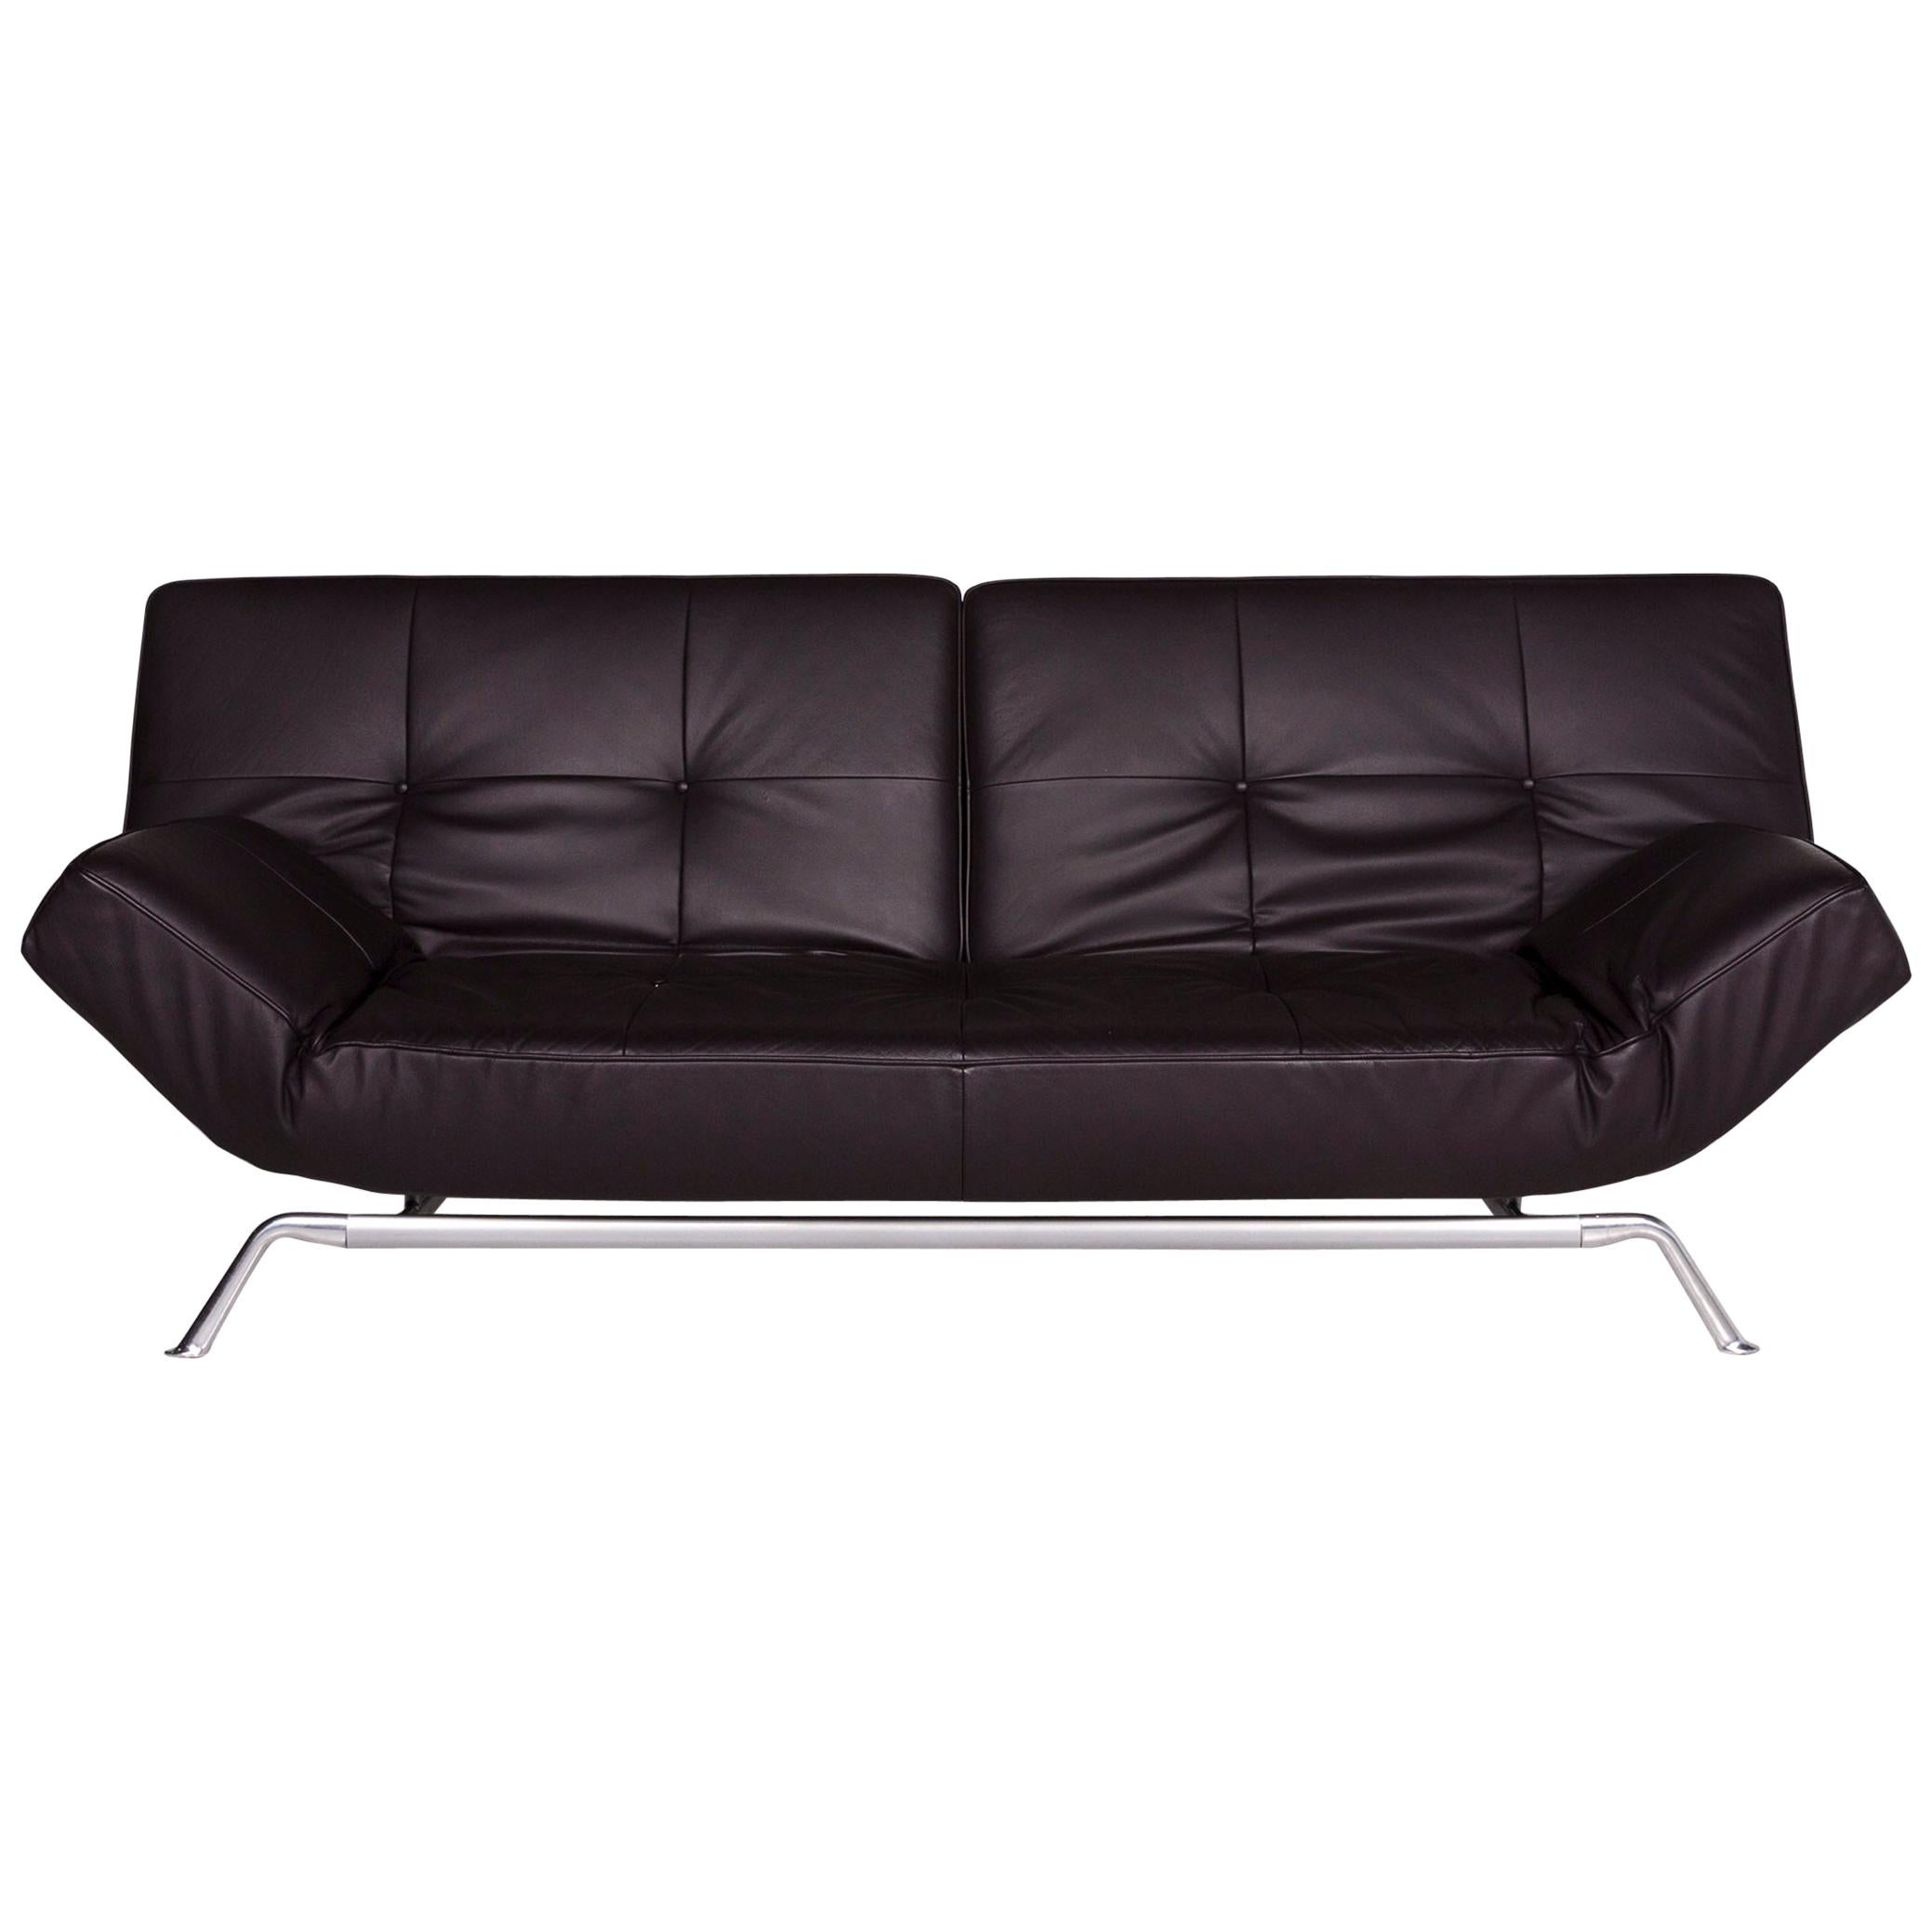 Ligne Roset Smala Leather Sofa Eggplant Two-Seat Sofa Bed Function Couch